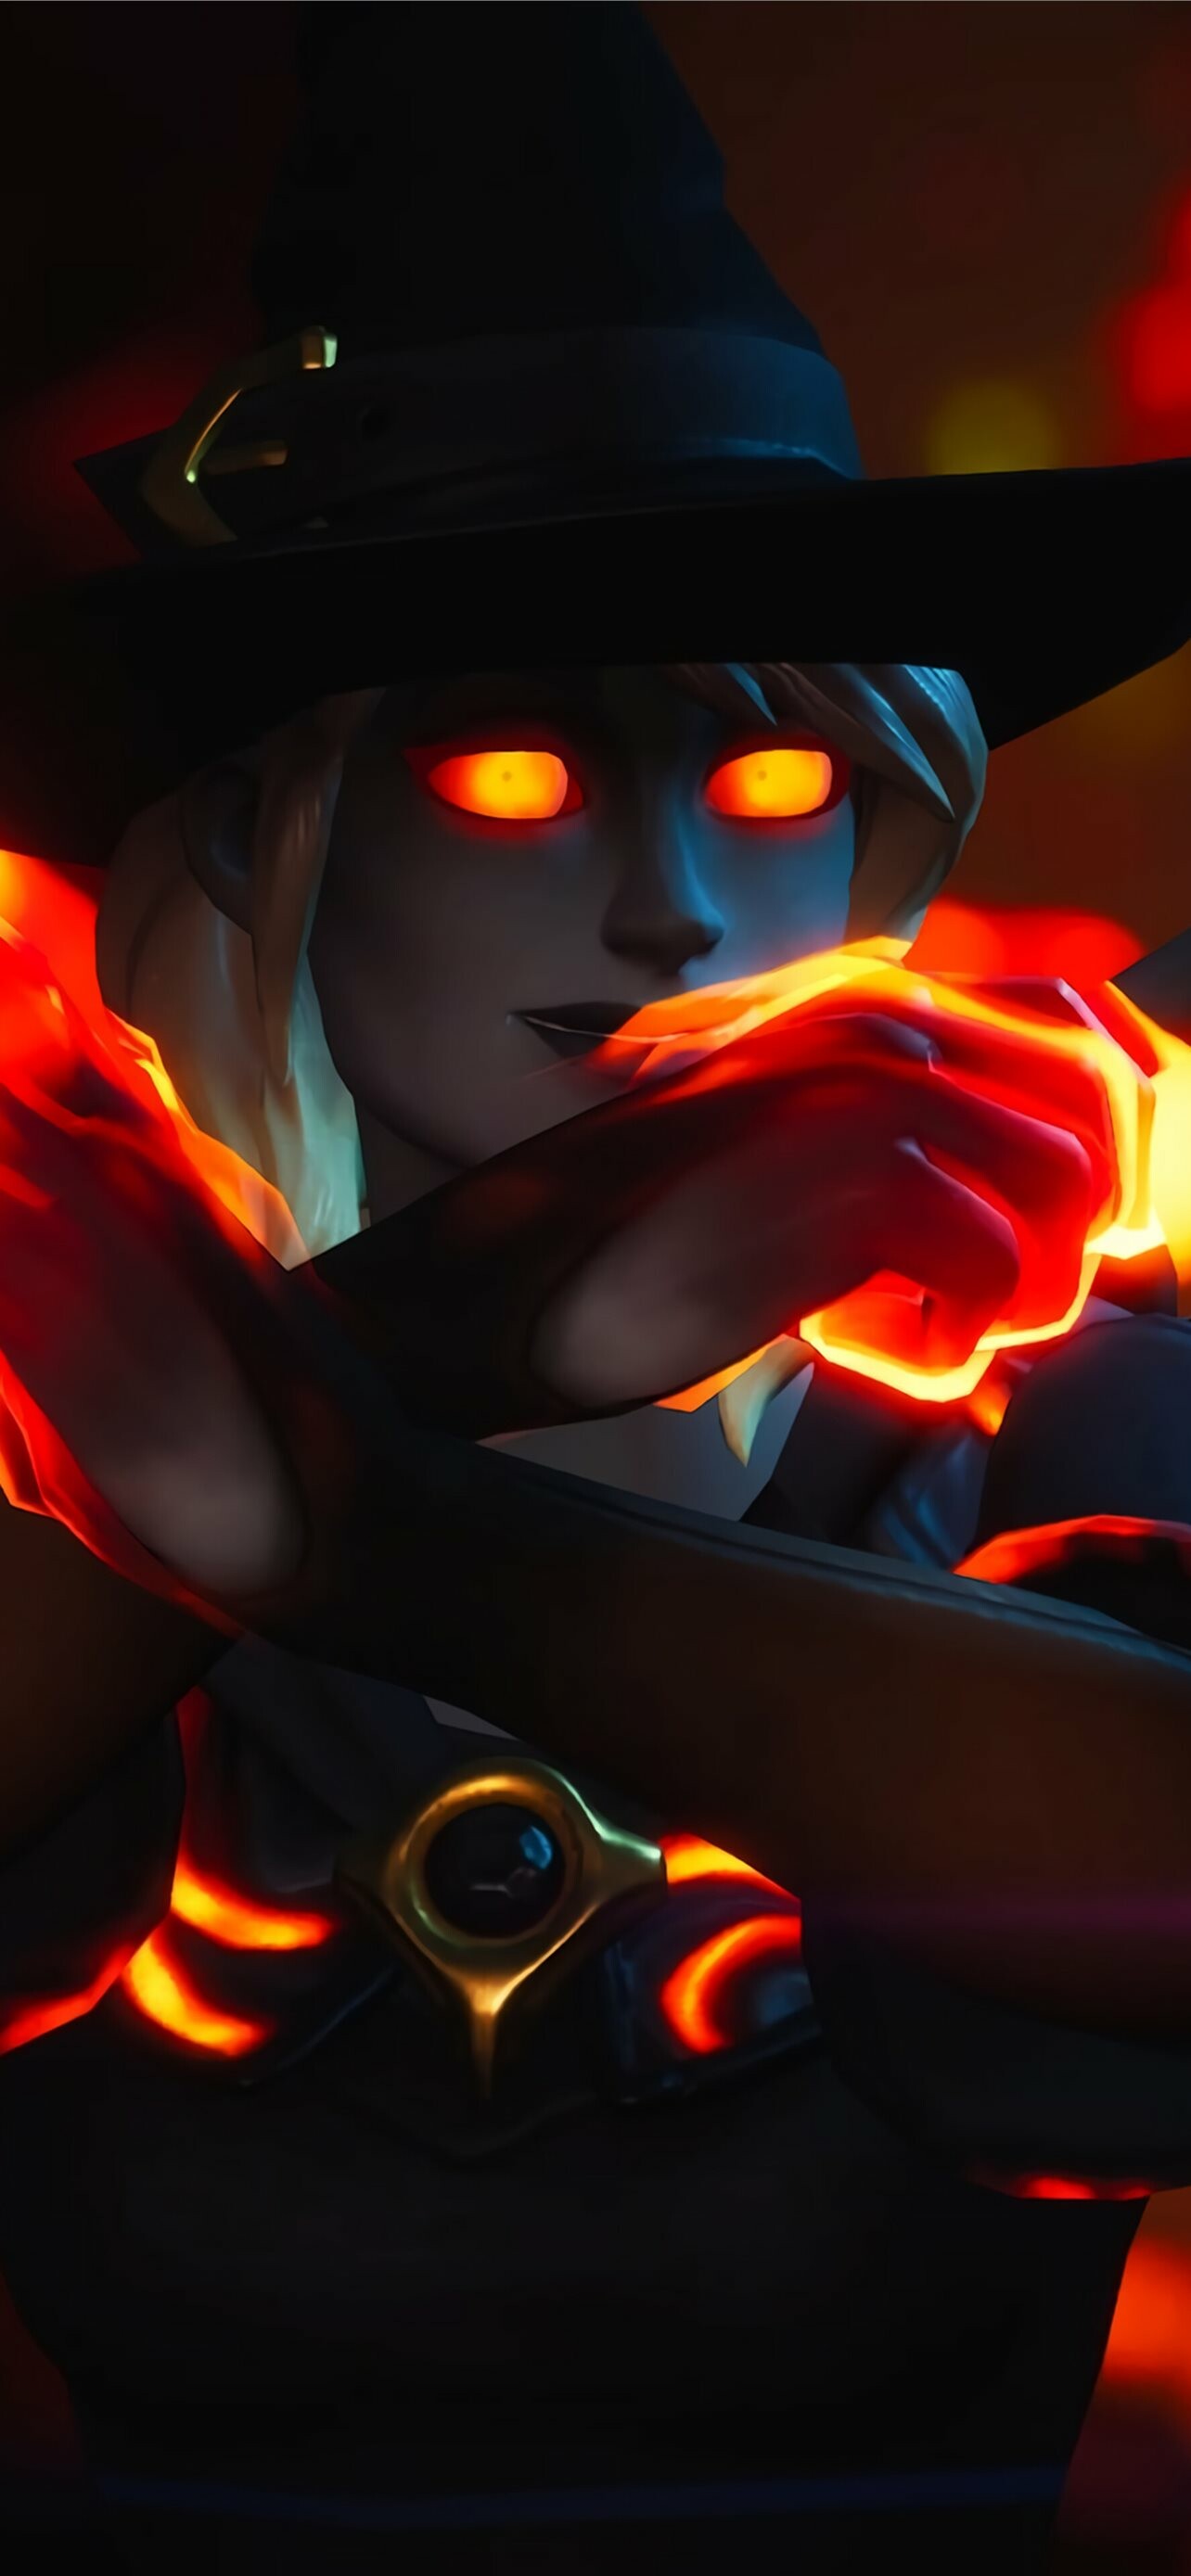 Witch: The Surf Witch Skin, Rare Fortnite Outfit from the Demon Beach set. 1290x2780 HD Background.